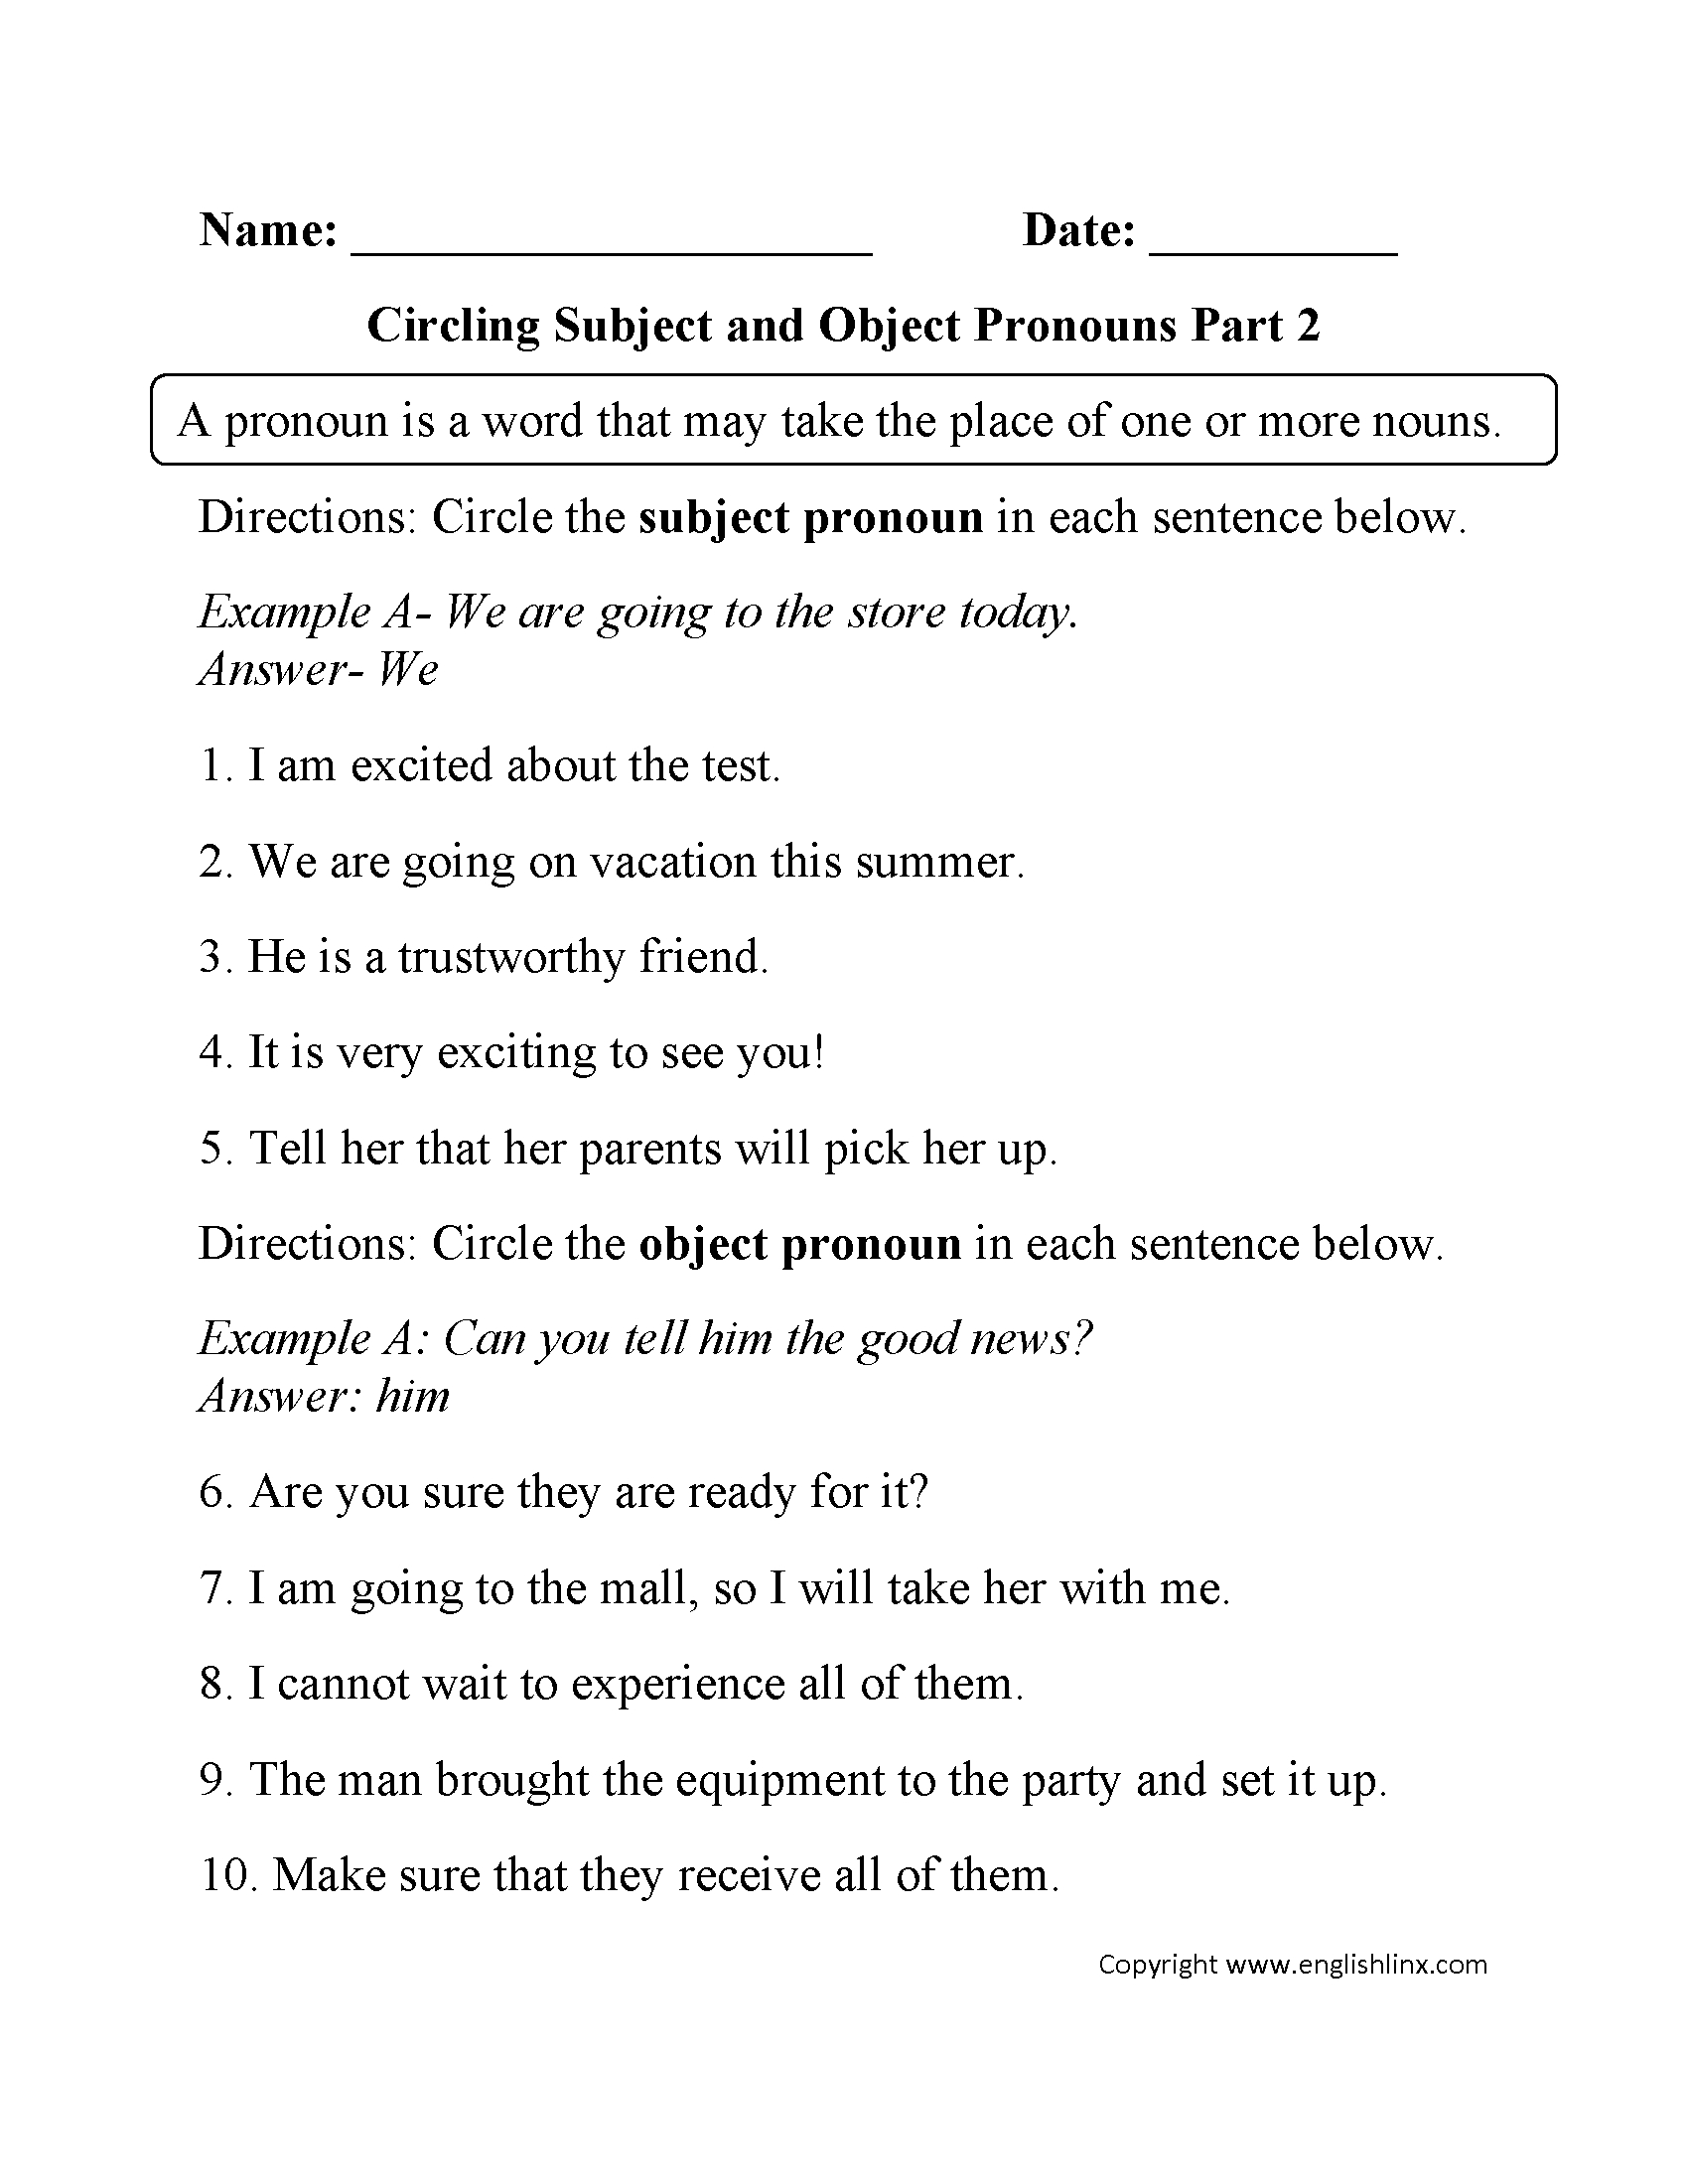 Pronouns Worksheets  Subject And Object Pronouns Worksheets For Subject Pronouns In Spanish Worksheet Answers